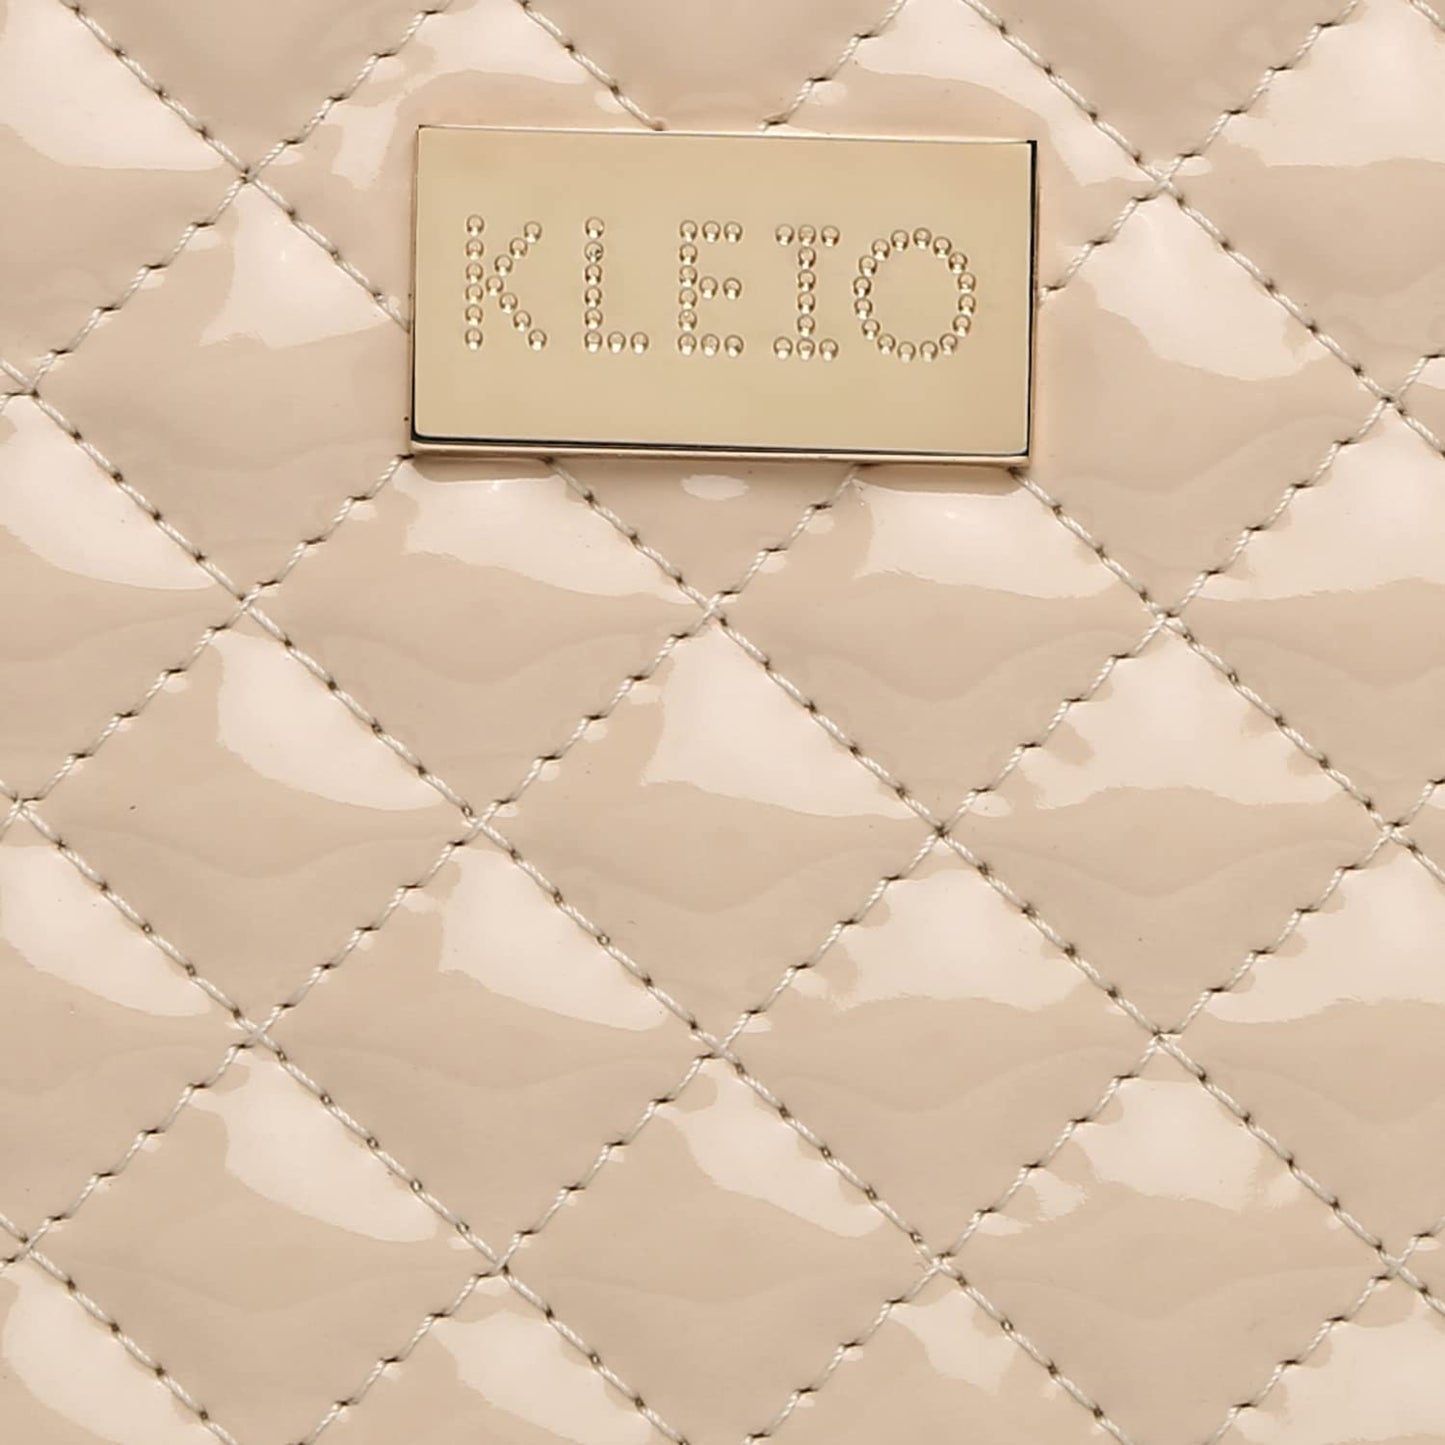 KLEIO Quilted Small Boxy Structured Leather Hand Bag for Women (Cream) with Zip & Adjustable Cross Body Strap | Spacious Handbag for Girls Suitable for Casual & Everyday Use